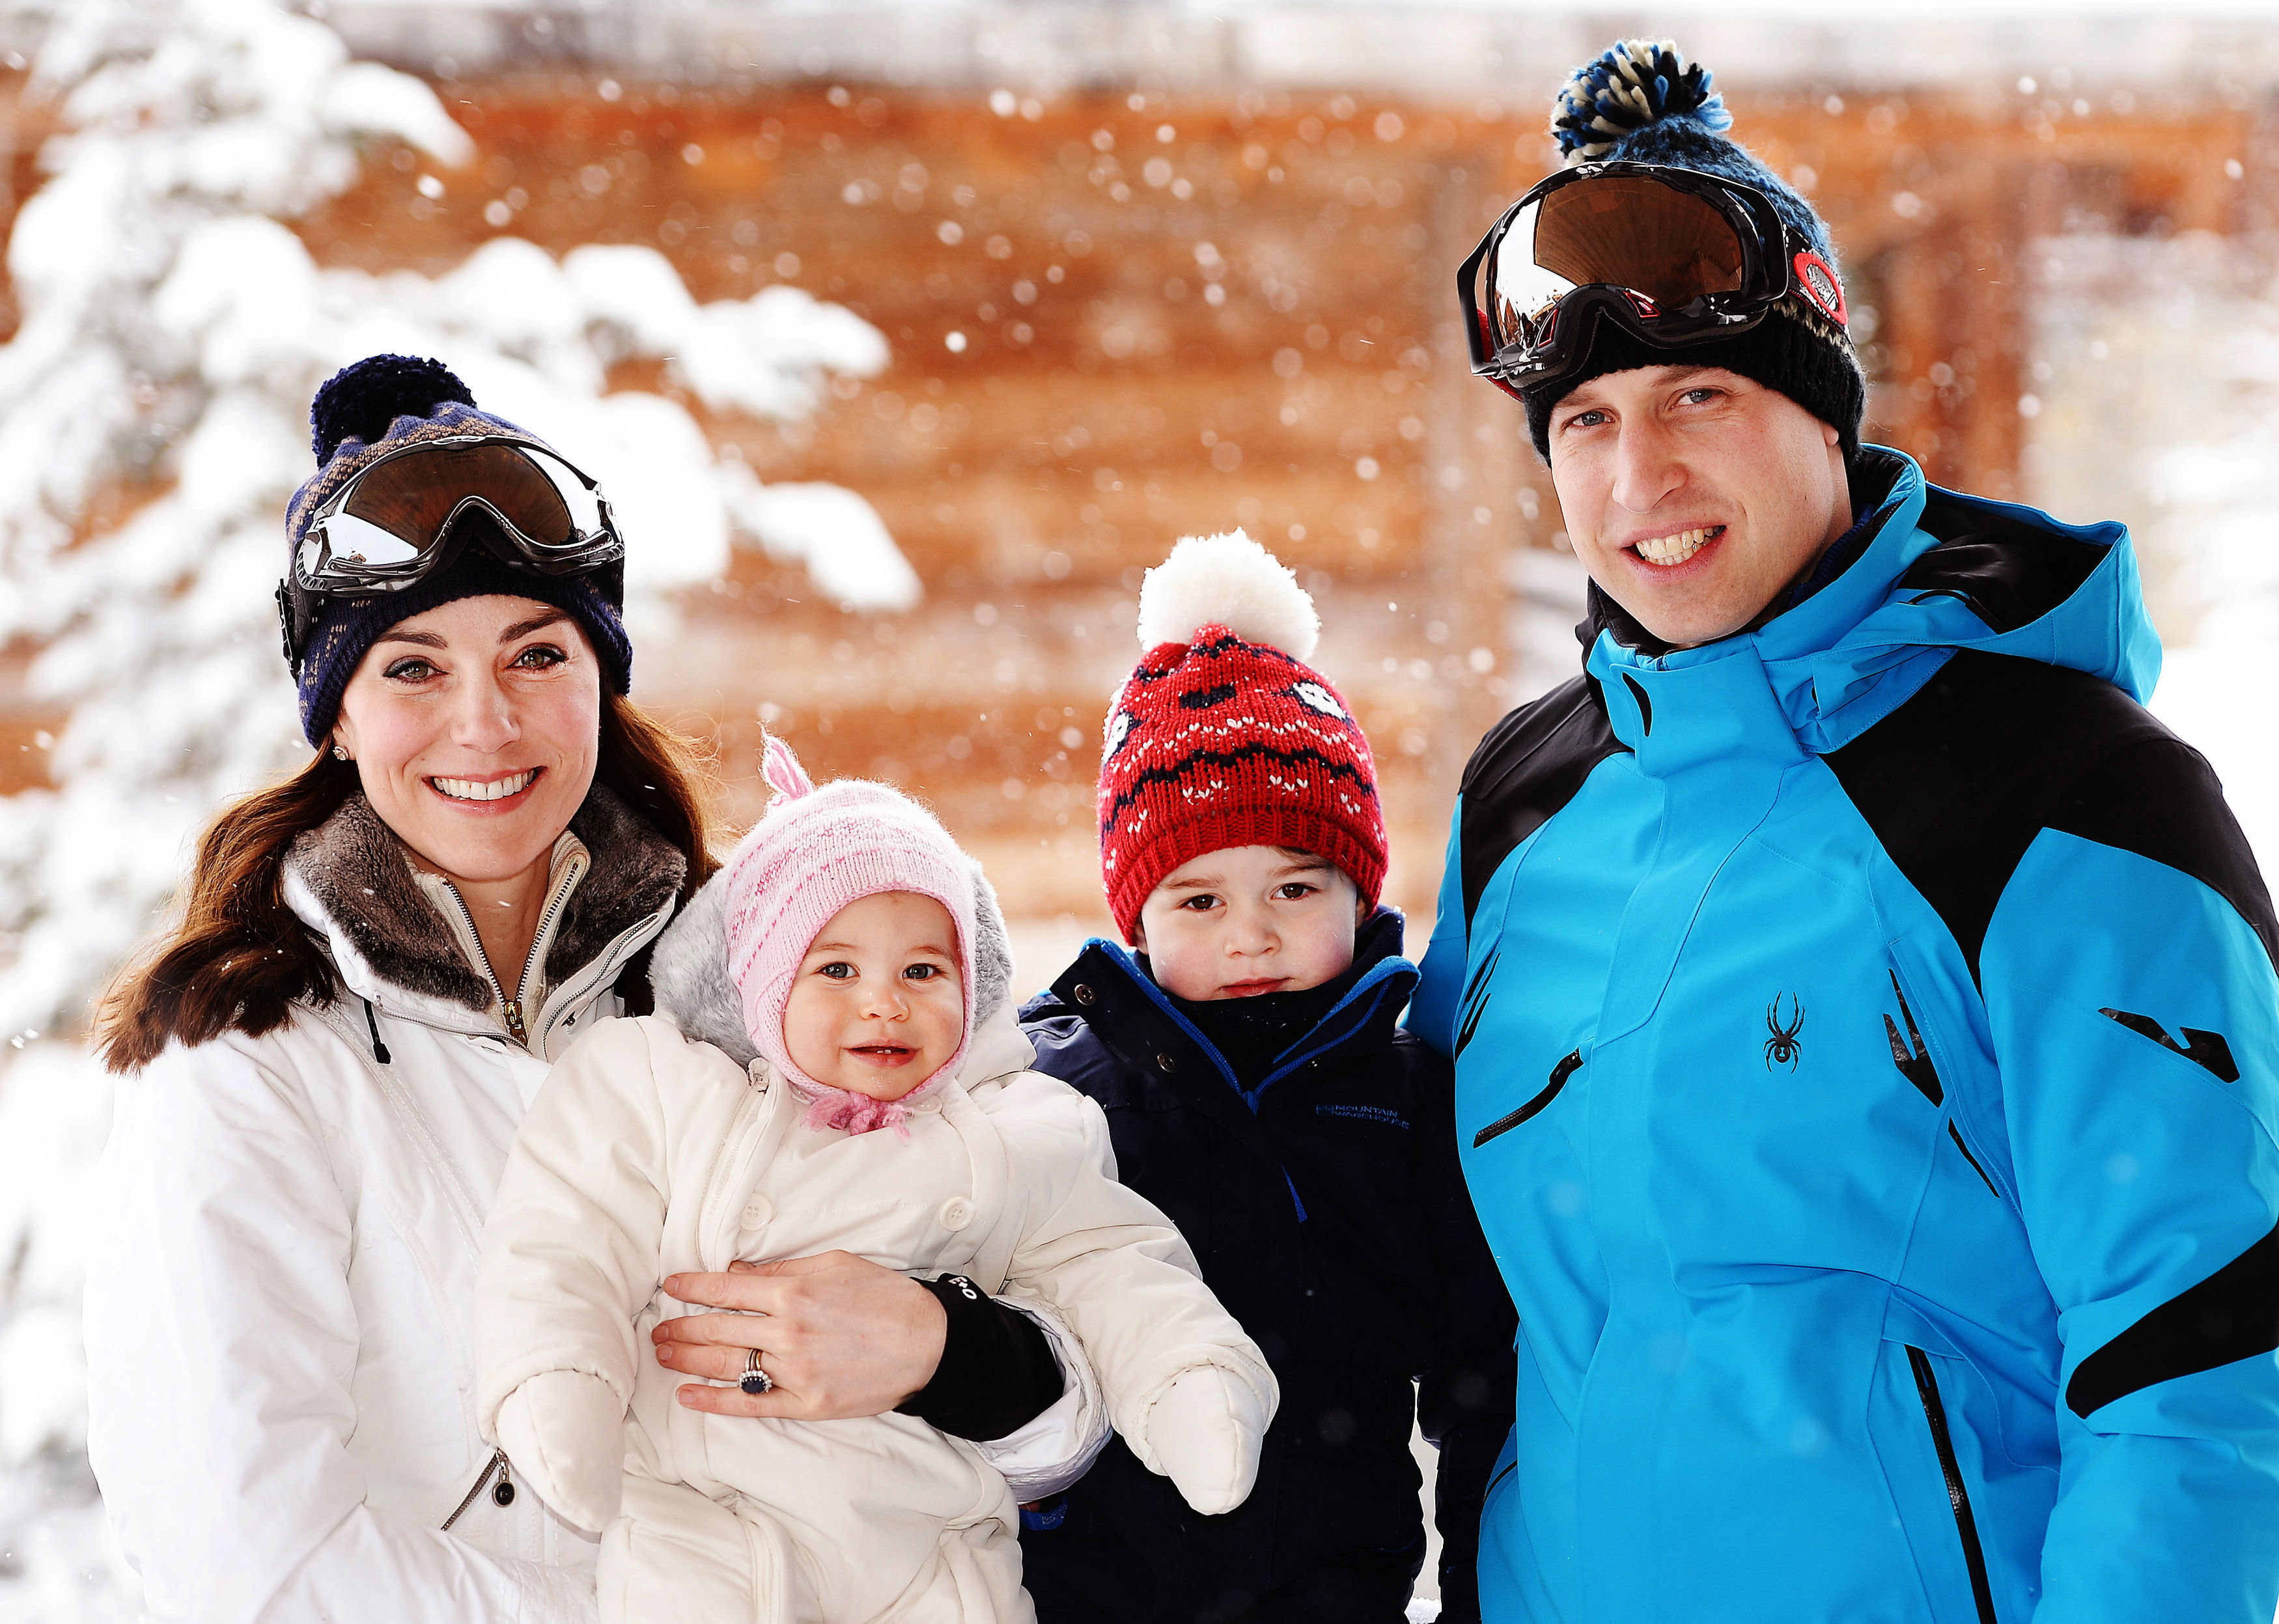 Catherine, Duchess of Cambridge and Prince William, Duke of Cambridge, with their children, Princess Charlotte and Prince George, enjoy a short private skiing break in the French Alps on March 3, 2016.